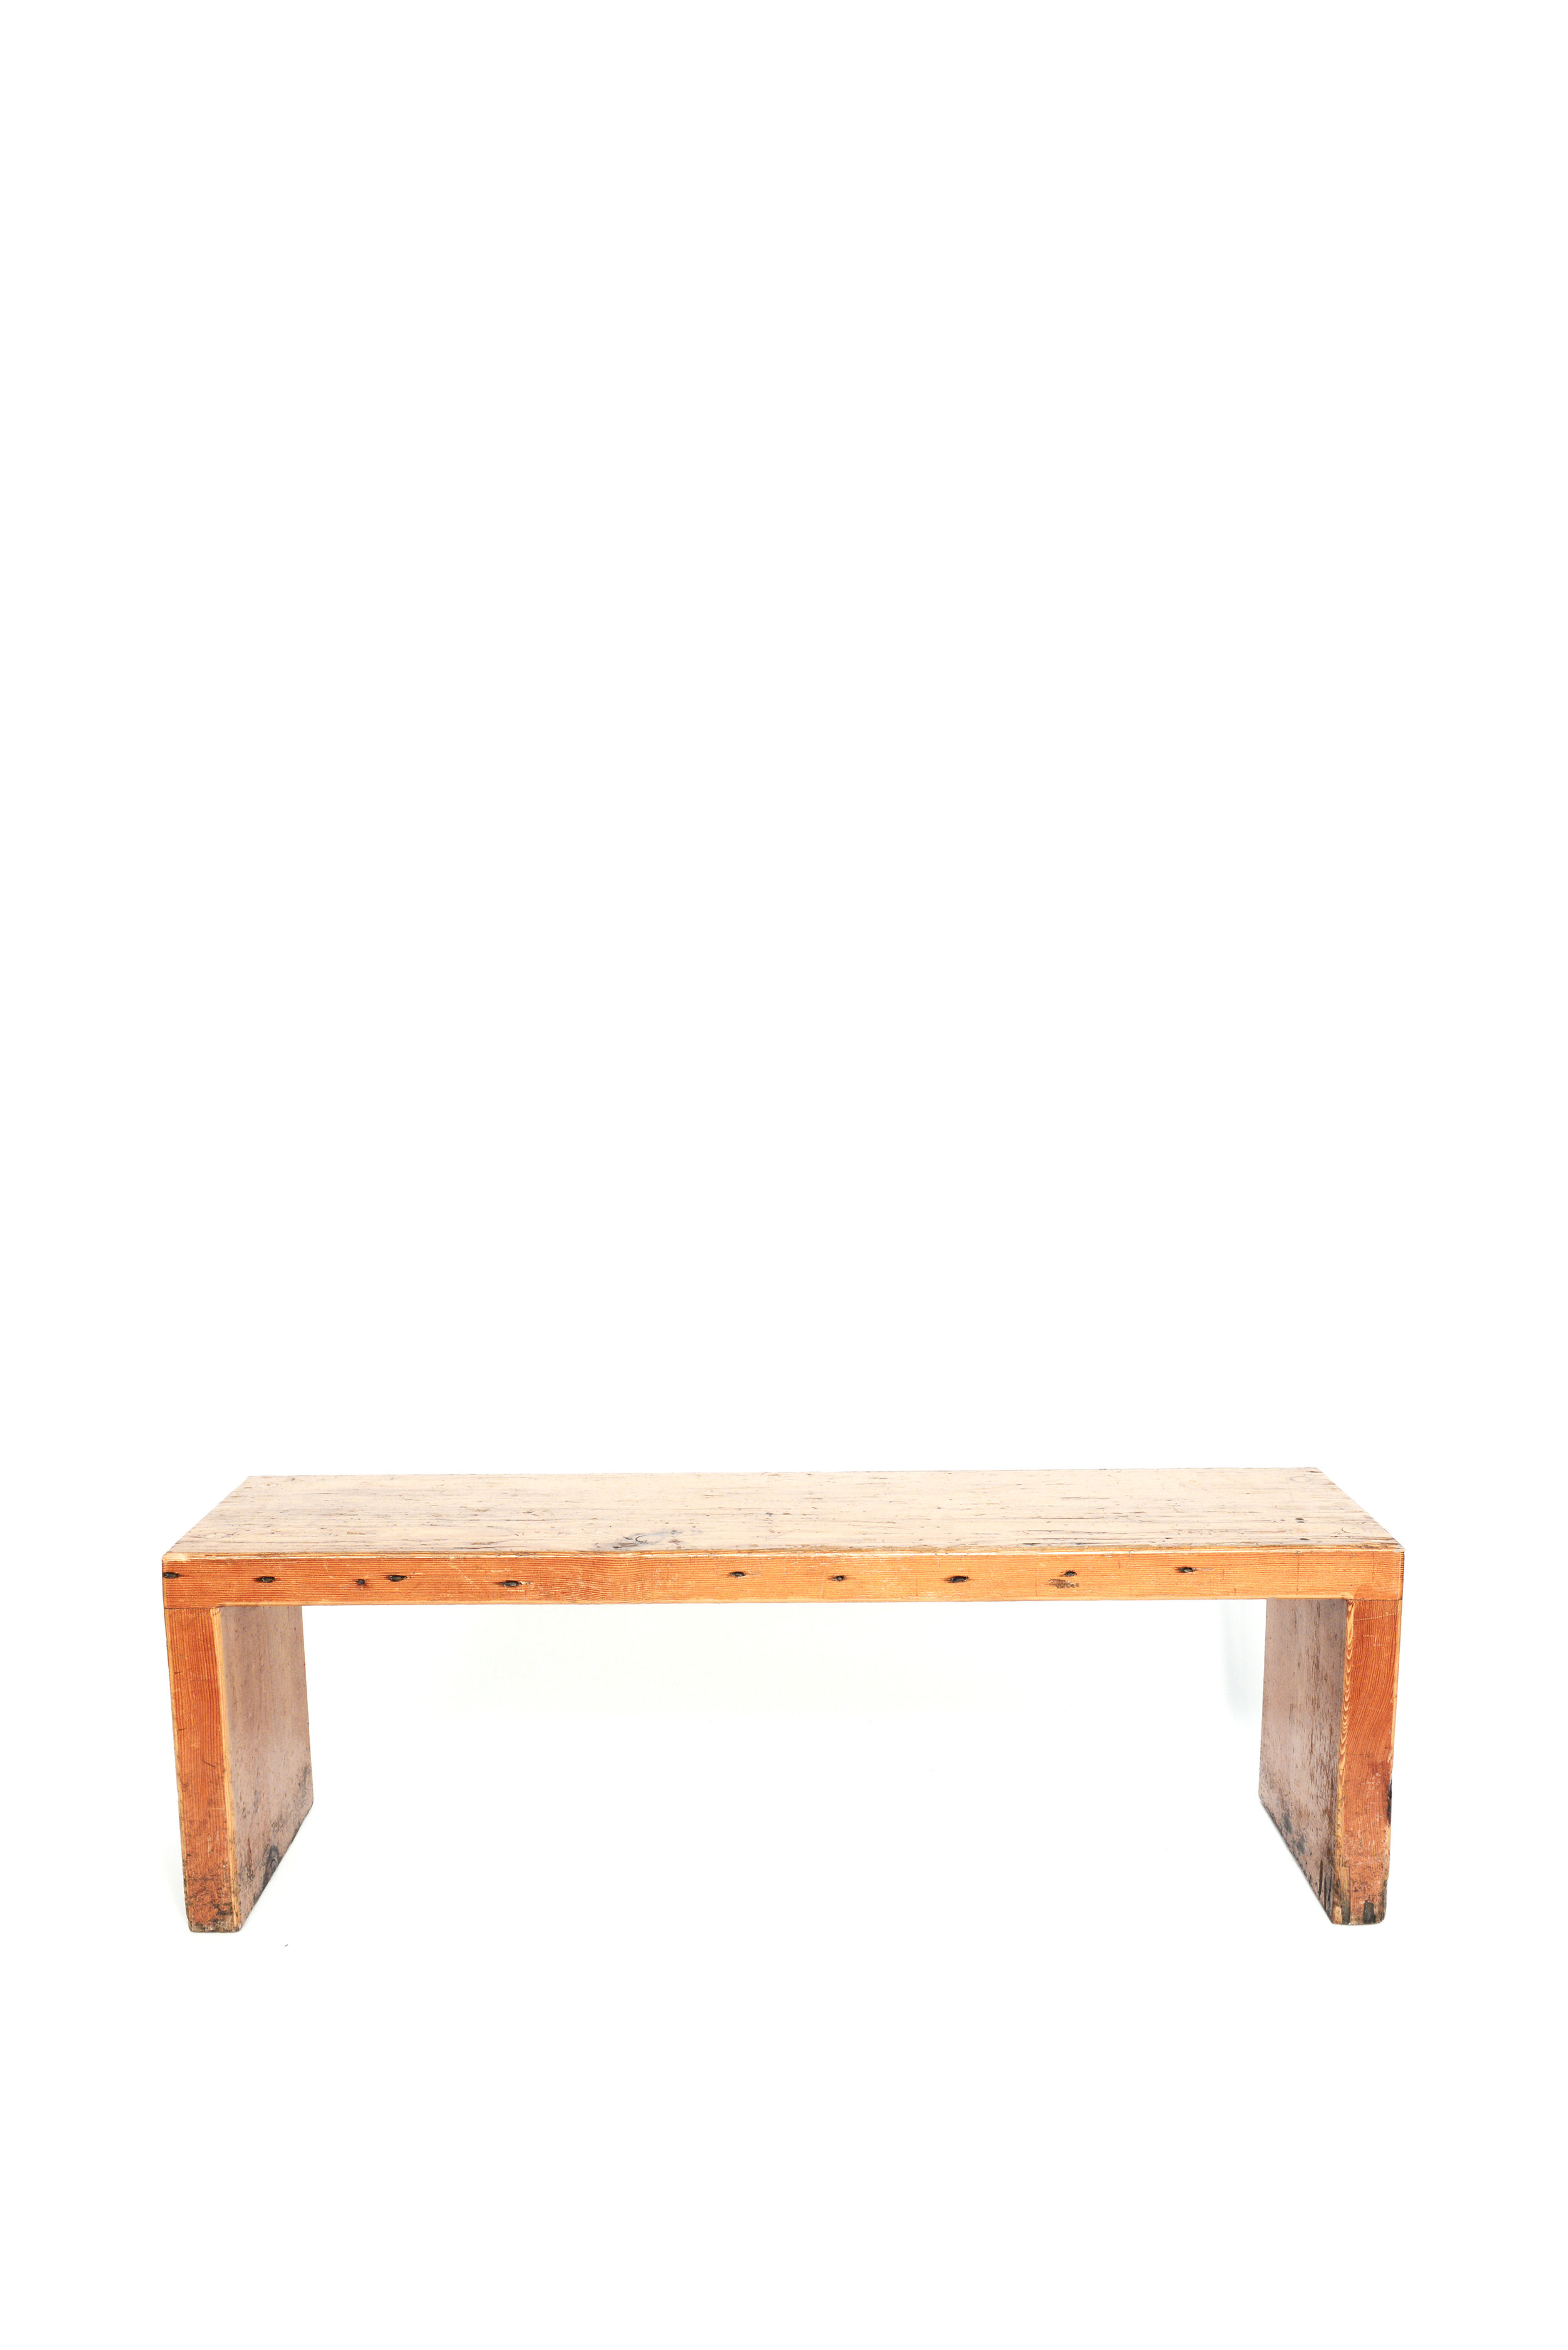 Reclaimed wooden bench qty. 6